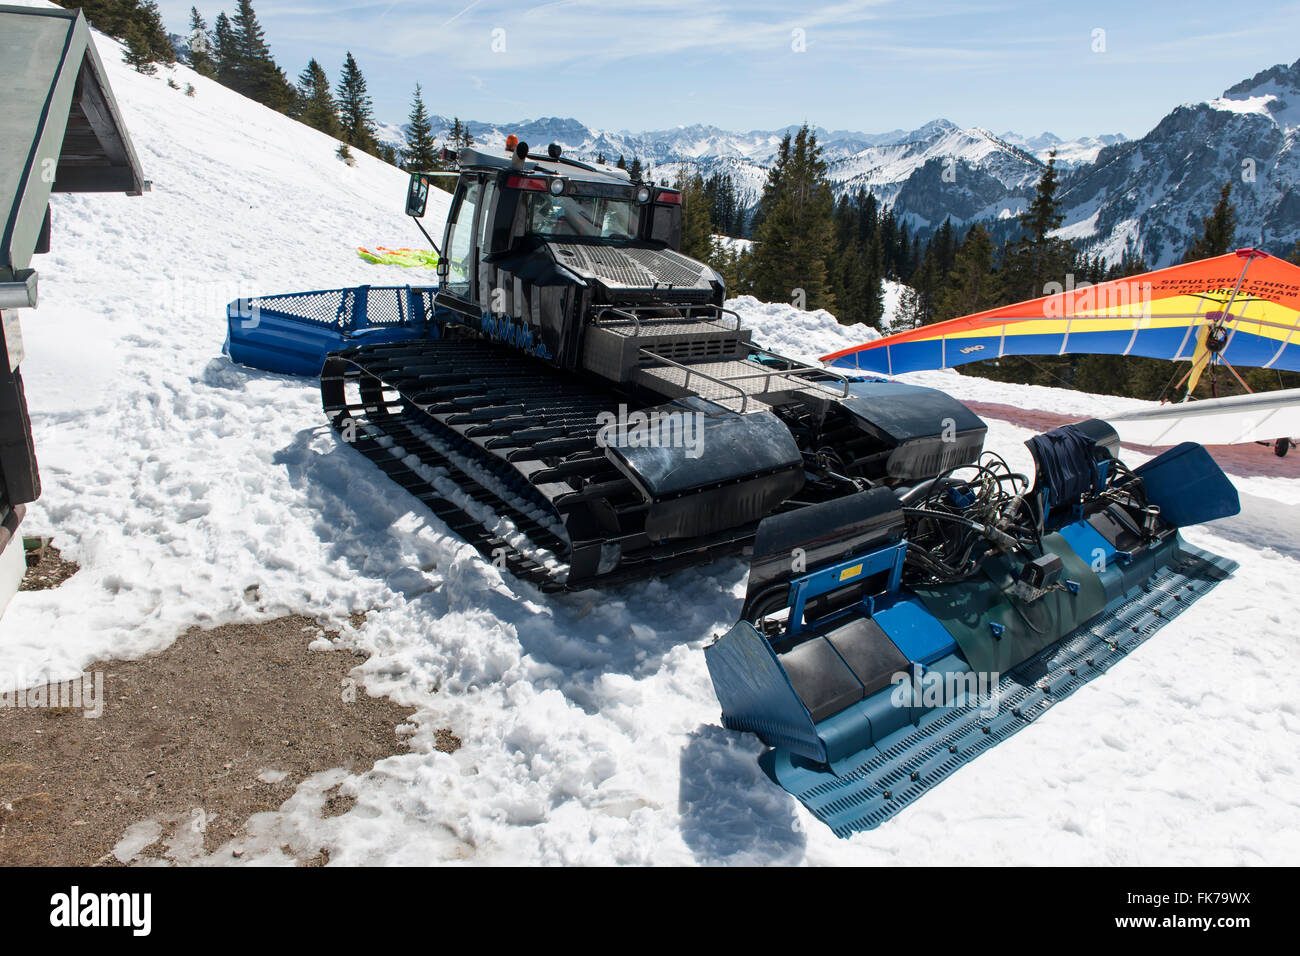 Füssen, Germany - April 9, 2015: PistenBully at the snow-covered take-off place for paragliders Stock Photo